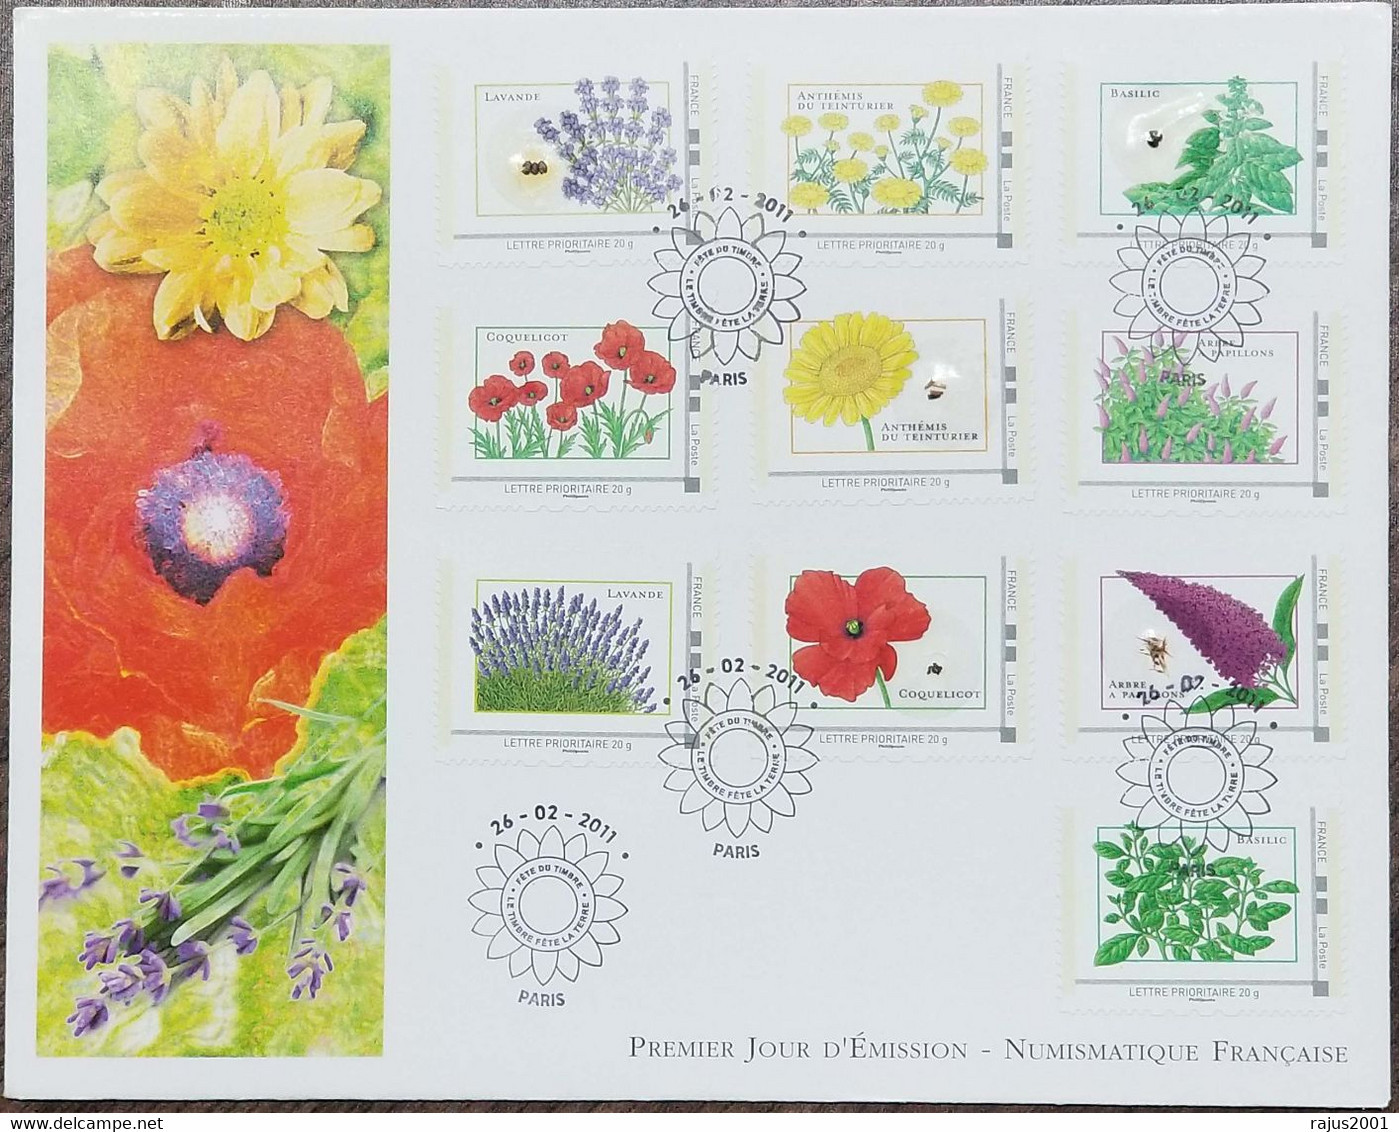 Seeds Of France, Seeds Of Lavander, Anthemis, DIFFERENT REAL FLOWER SEEDS AFFIXED ON Stamp UNUSUAL FDC 2011 - Erreurs Sur Timbres